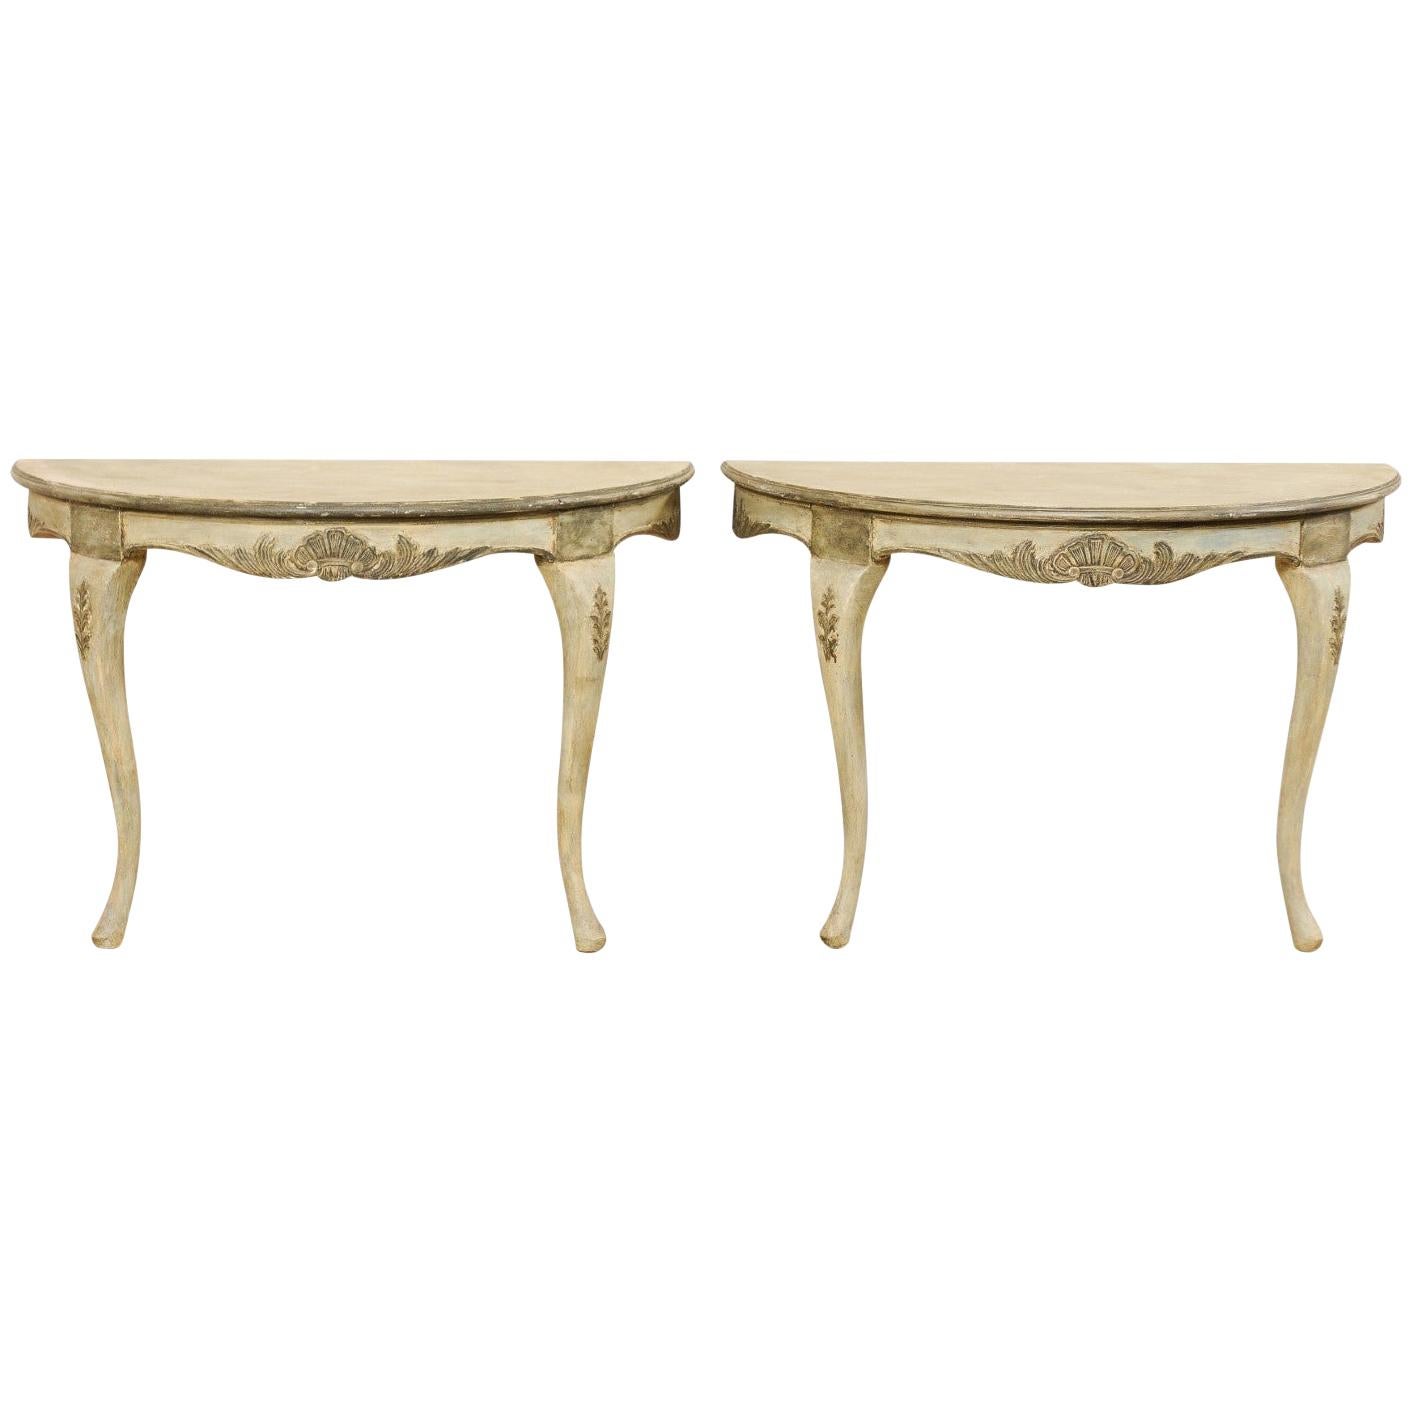 Swedish Pair of Wall-Mounted Demilune Tables with Carved Shell & Foliage Accents